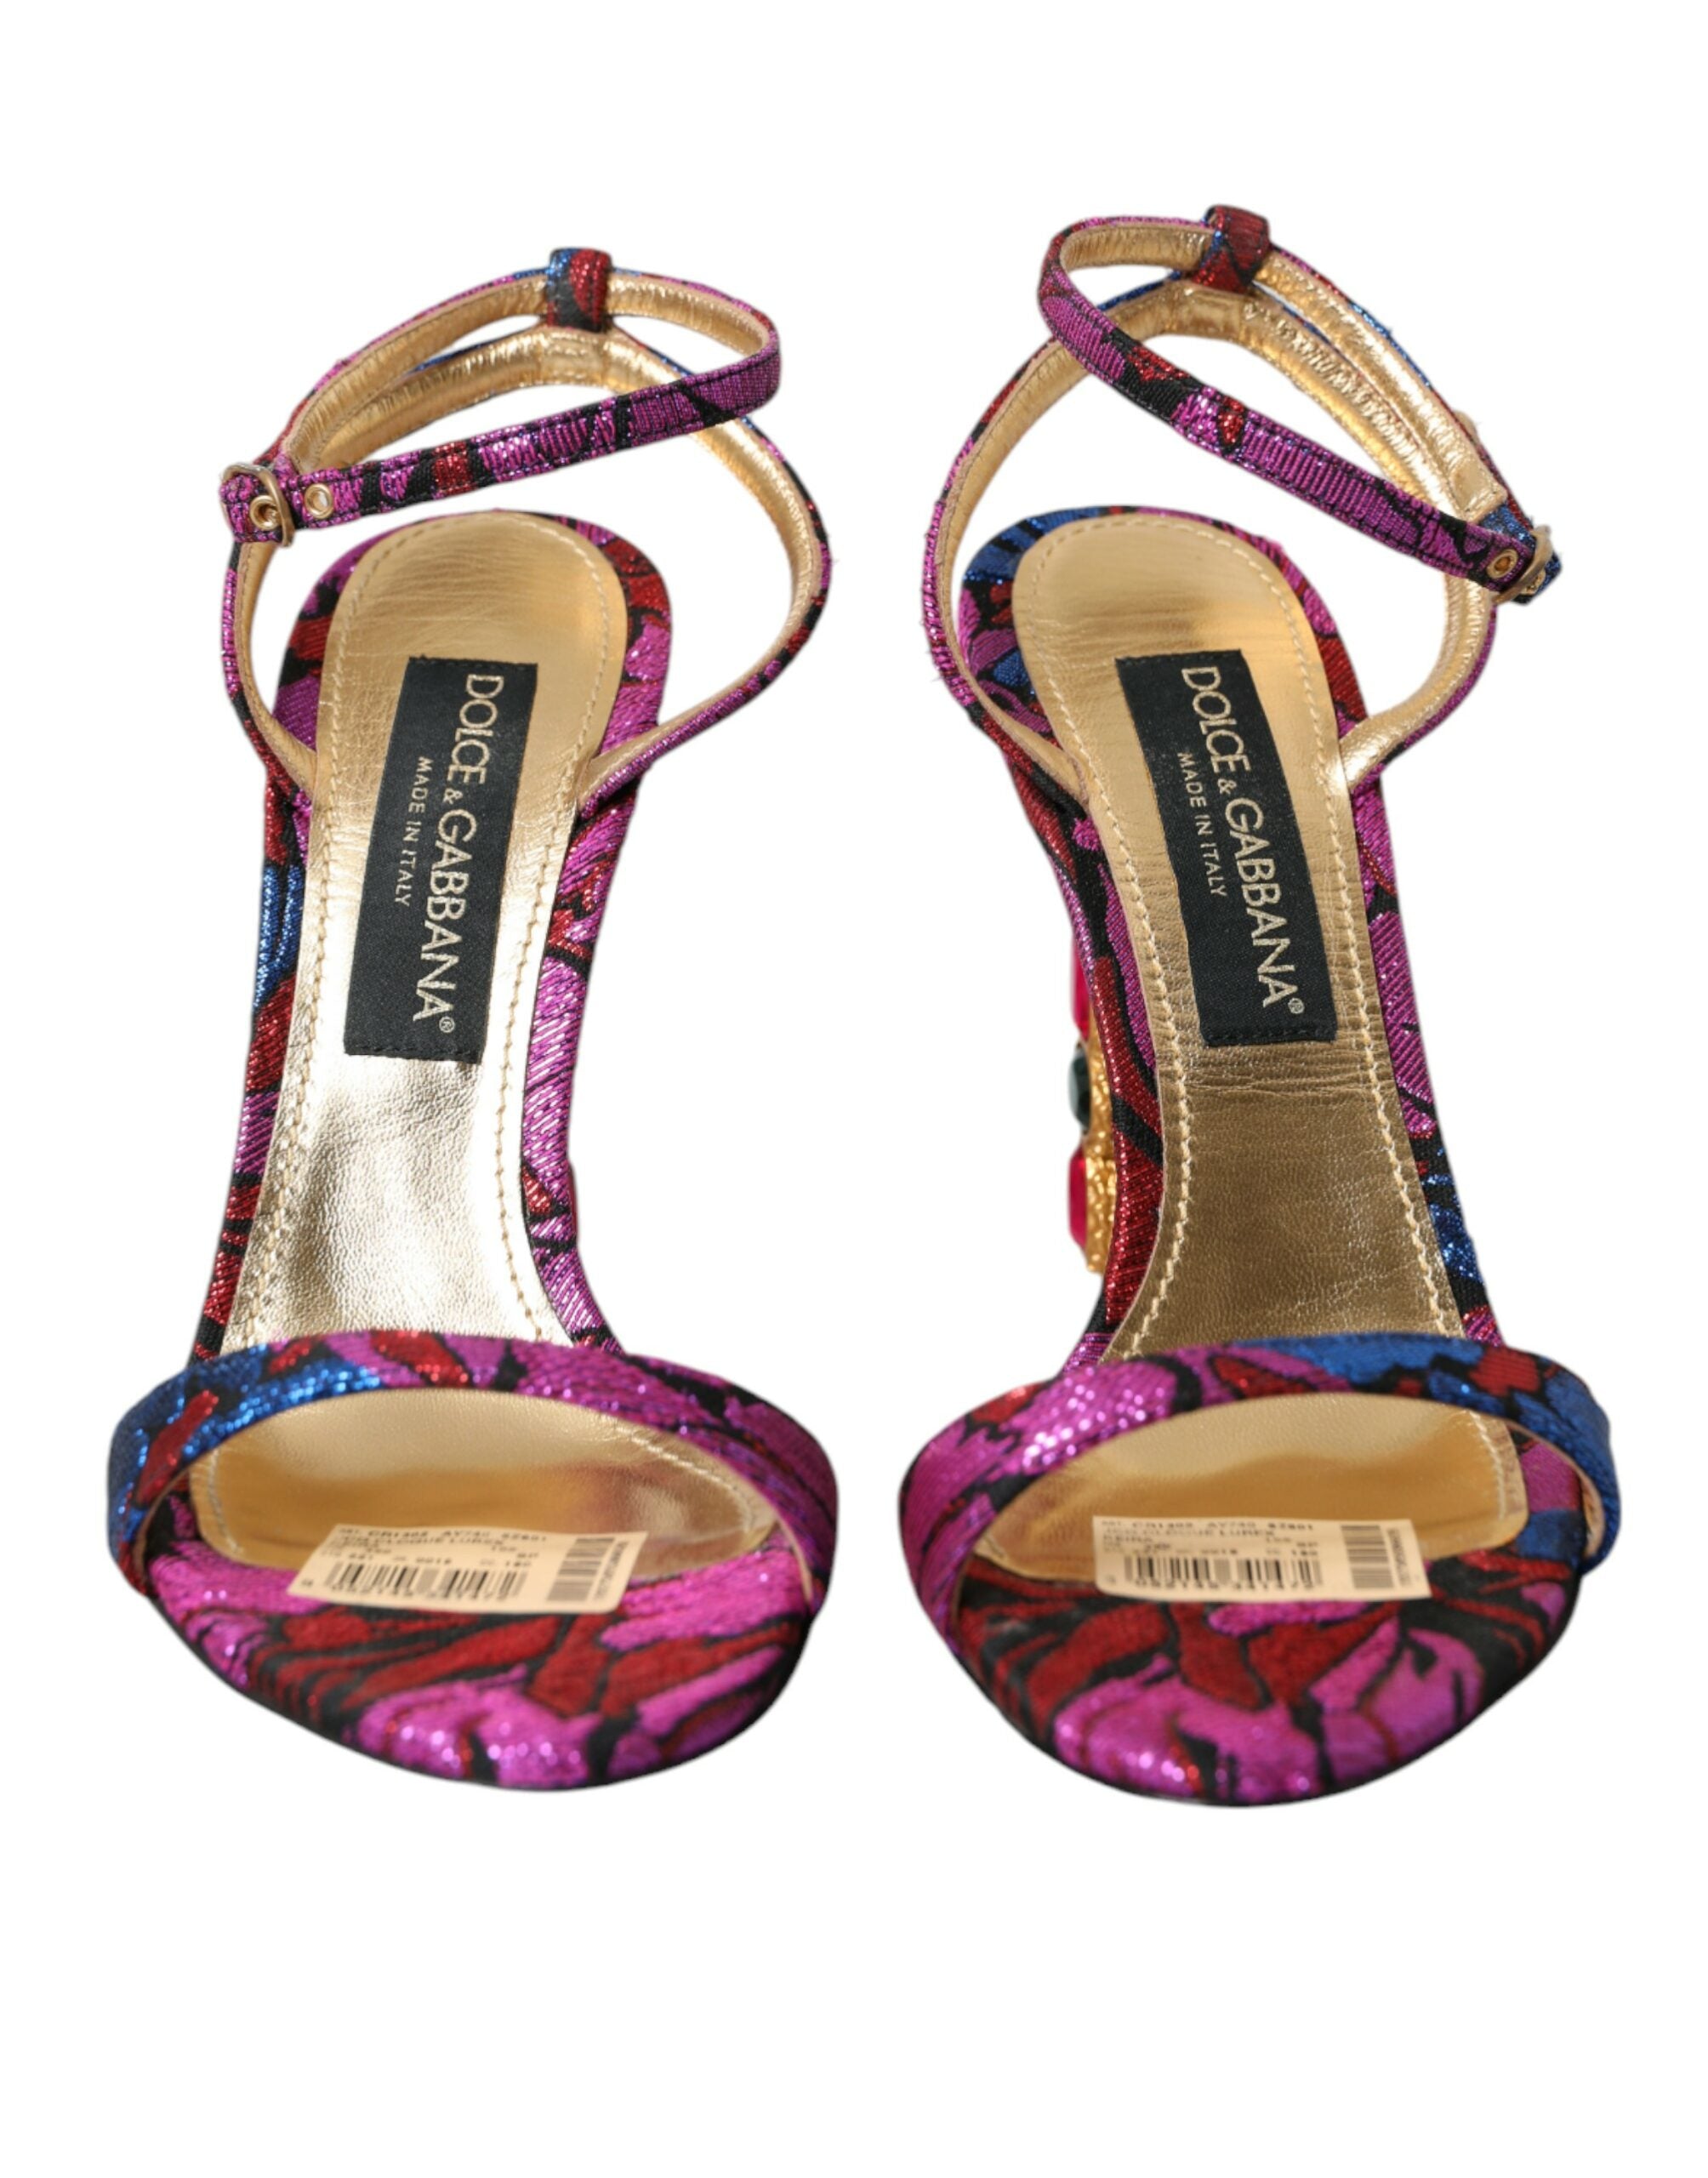 Multicolor Jacquard Crystals Sandals Shoes - Divitiae Glamour